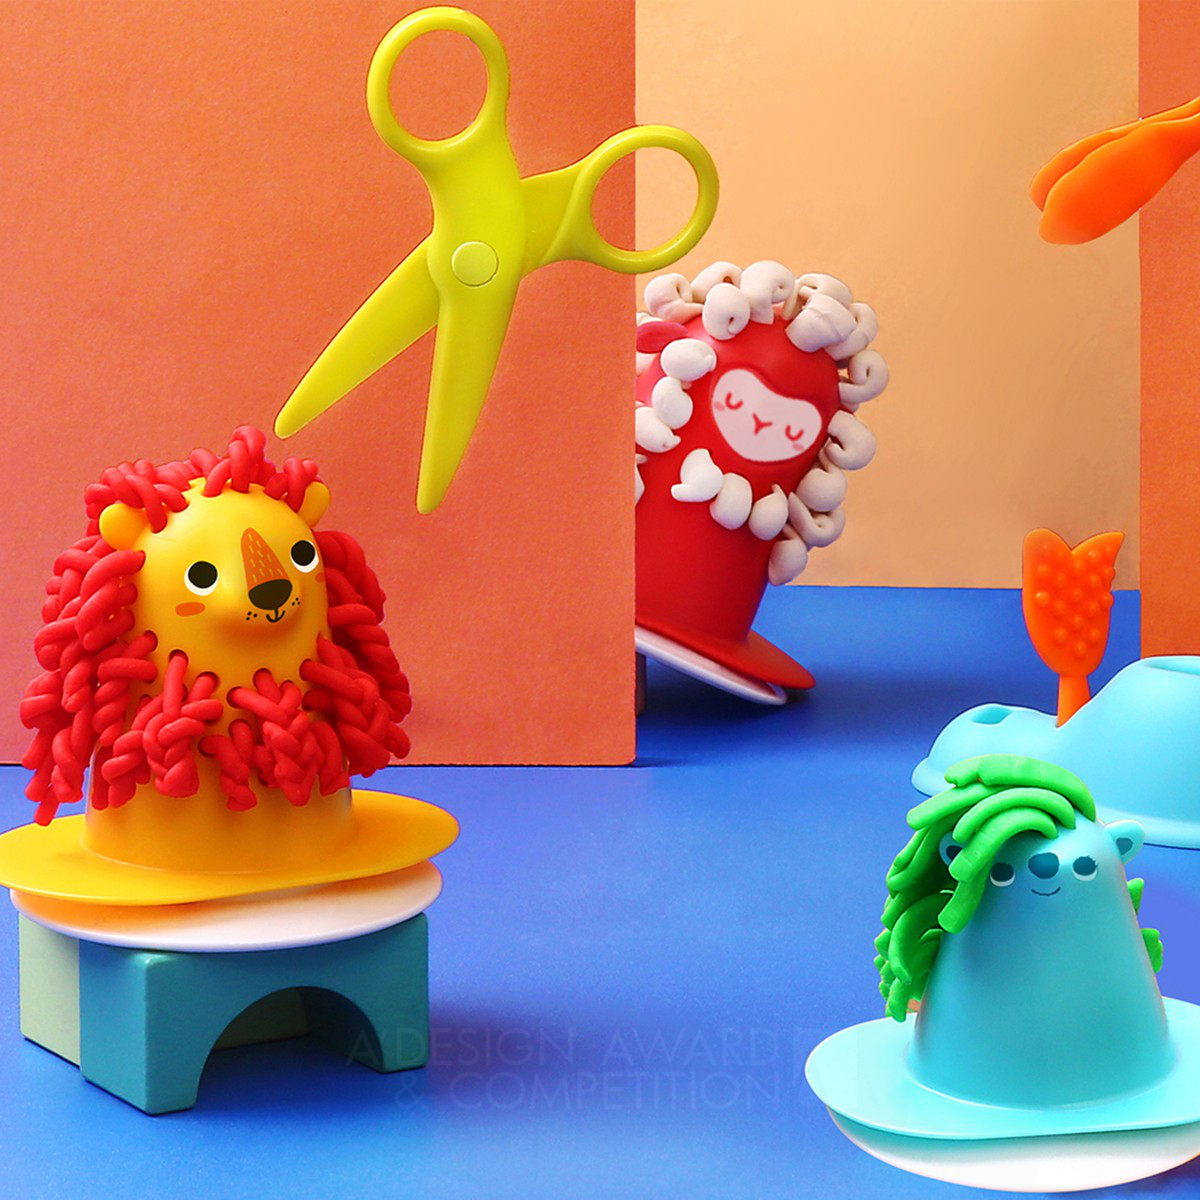 Yi Teng Shih's Hair Salon: A Sustainable Animal Toy for Creative Play